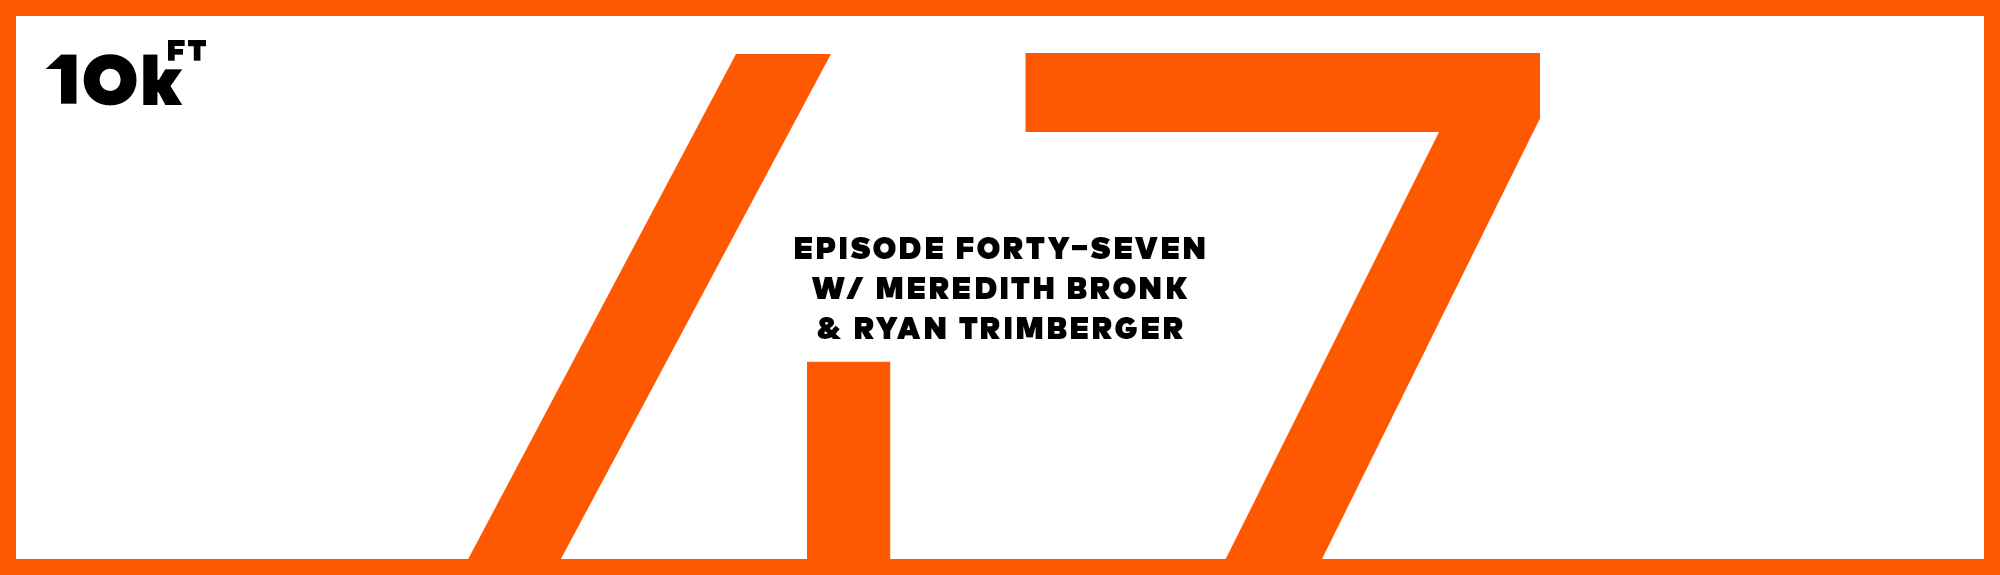 Orange rectangle with a white inside background. Top right corner has "10k ft" written. In the middle, the text reads "Episode Forty-Seven w/ Meredith Bronk & Ryan Trimberger ". A large "47" is written in orange behind this middle text.